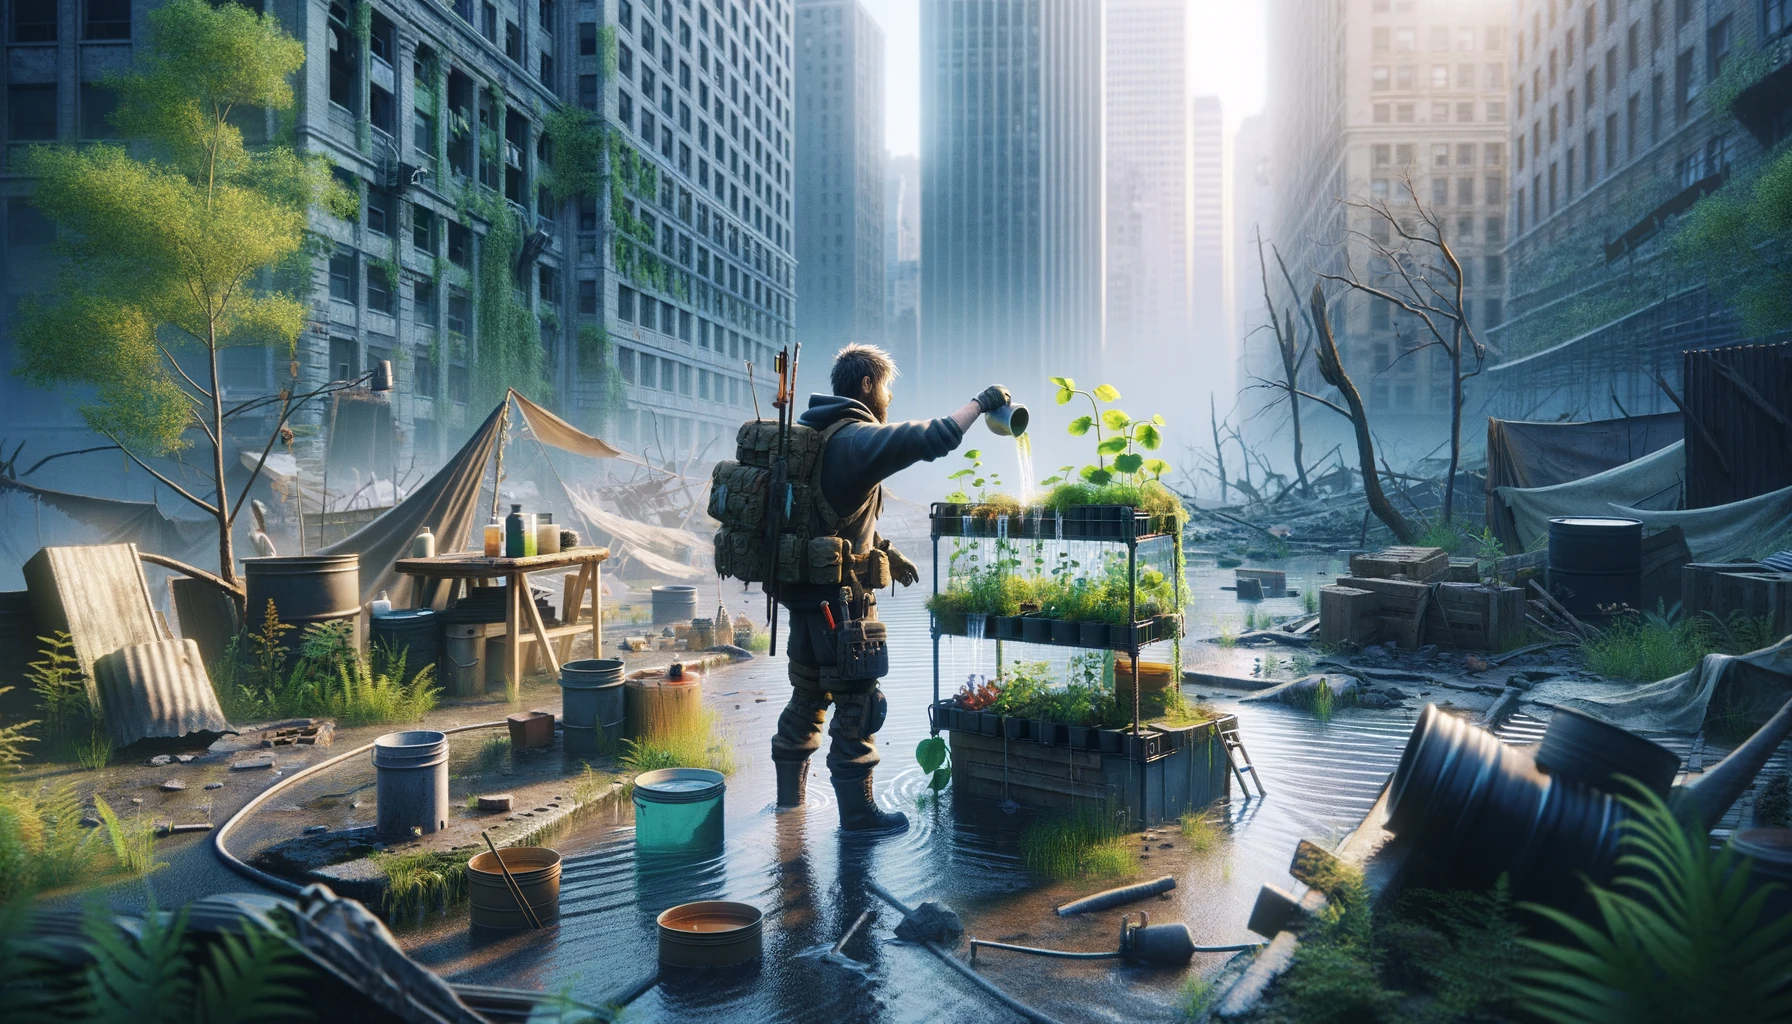 Prepper foraging and scavenging in a post-apocalyptic urban setting, identifying edible plants and collecting resources, highlighting urban survival skills